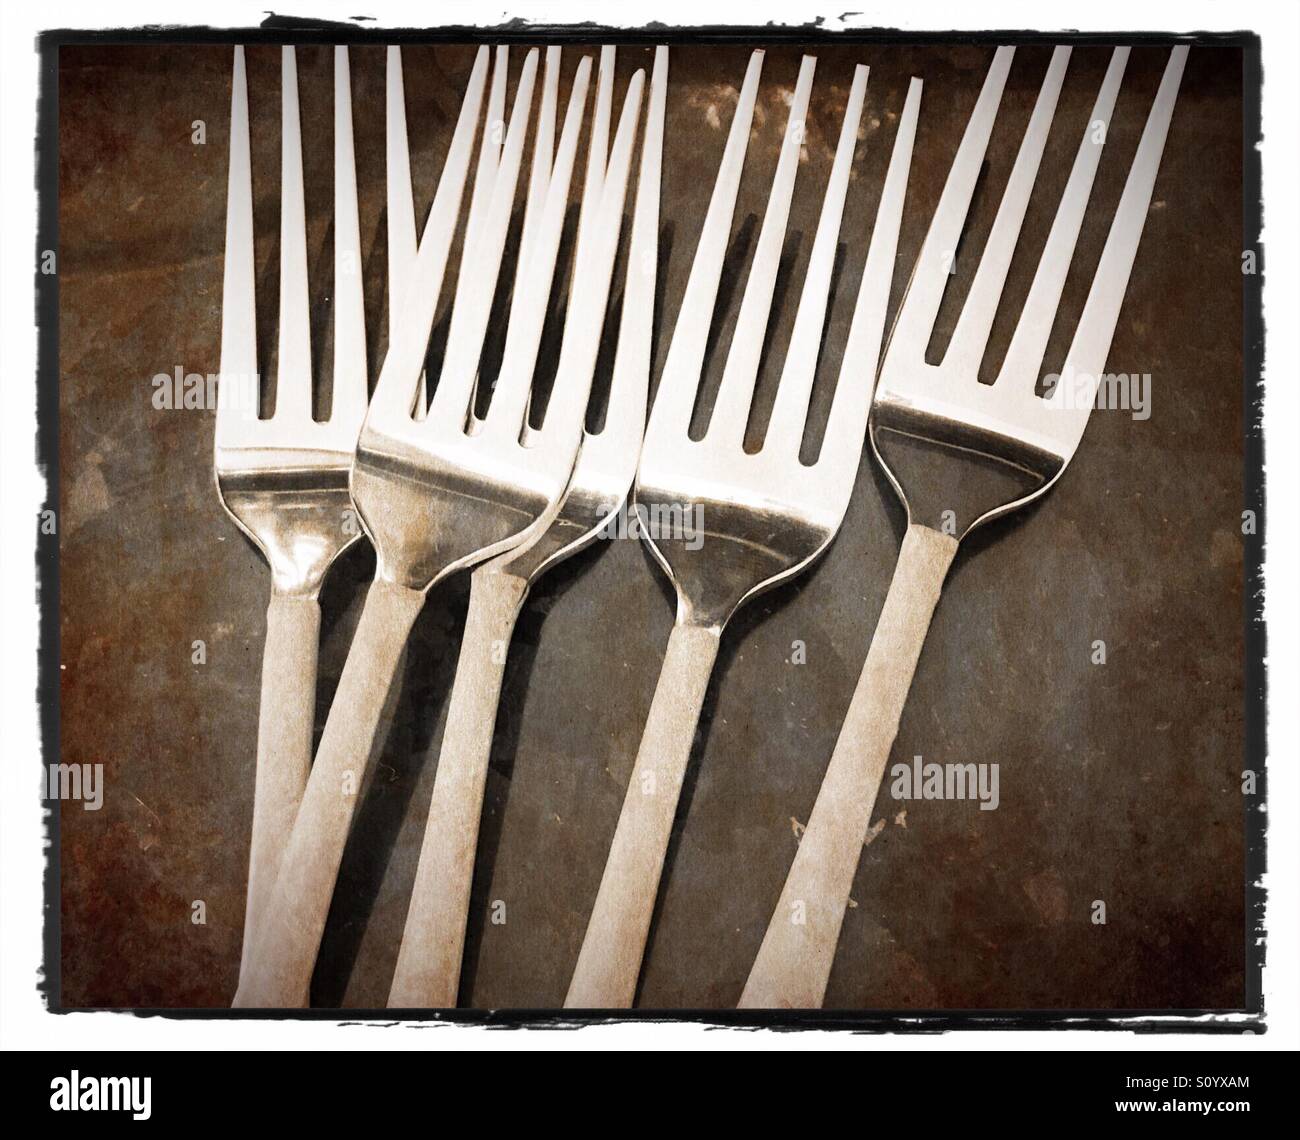 Forks in a row silver cutlery Stock Photo